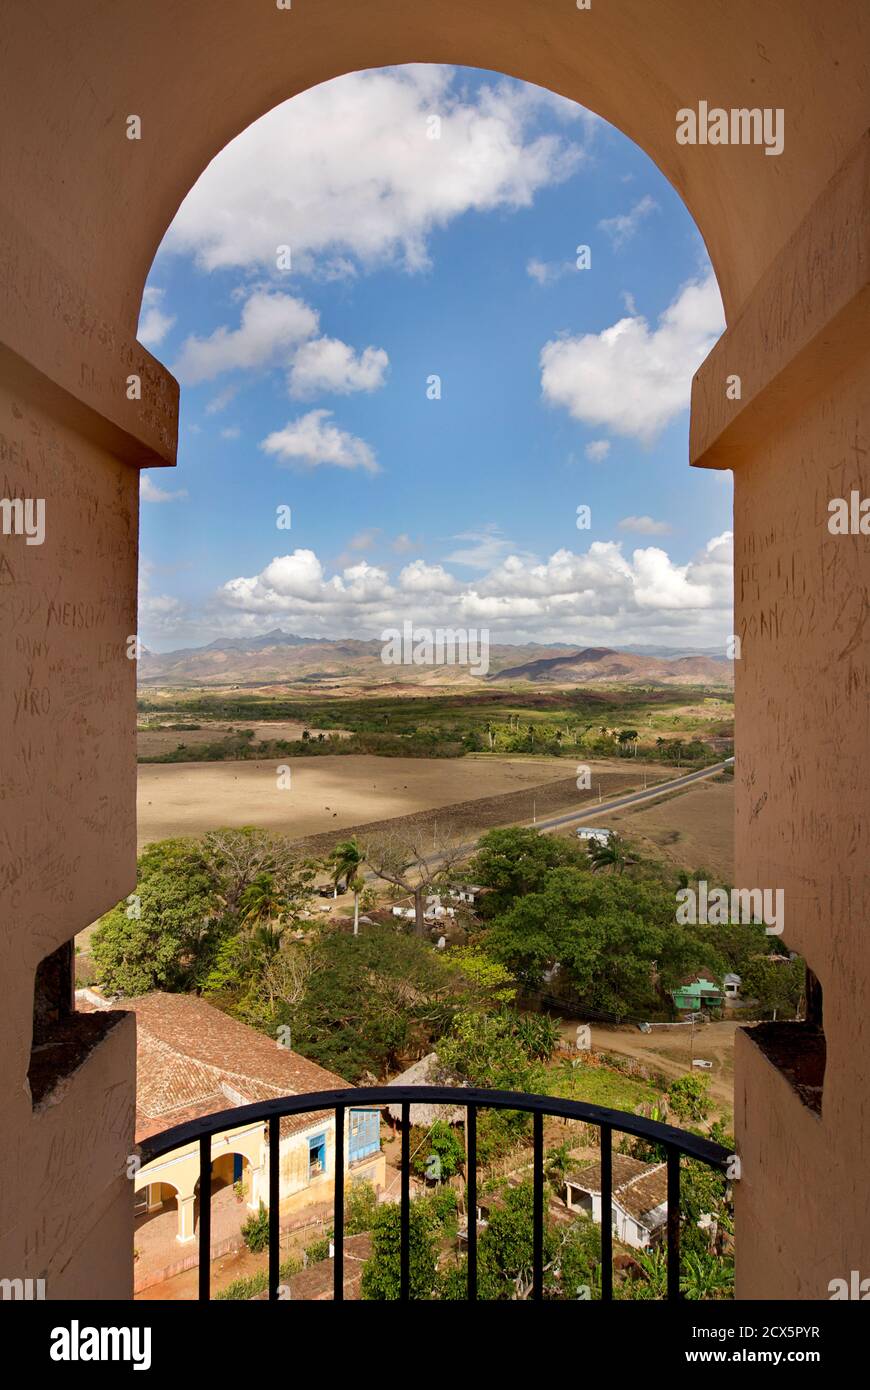 View from the tower at Manaca Ignaza, Valle de los Ingenios, Cuba Stock Photo